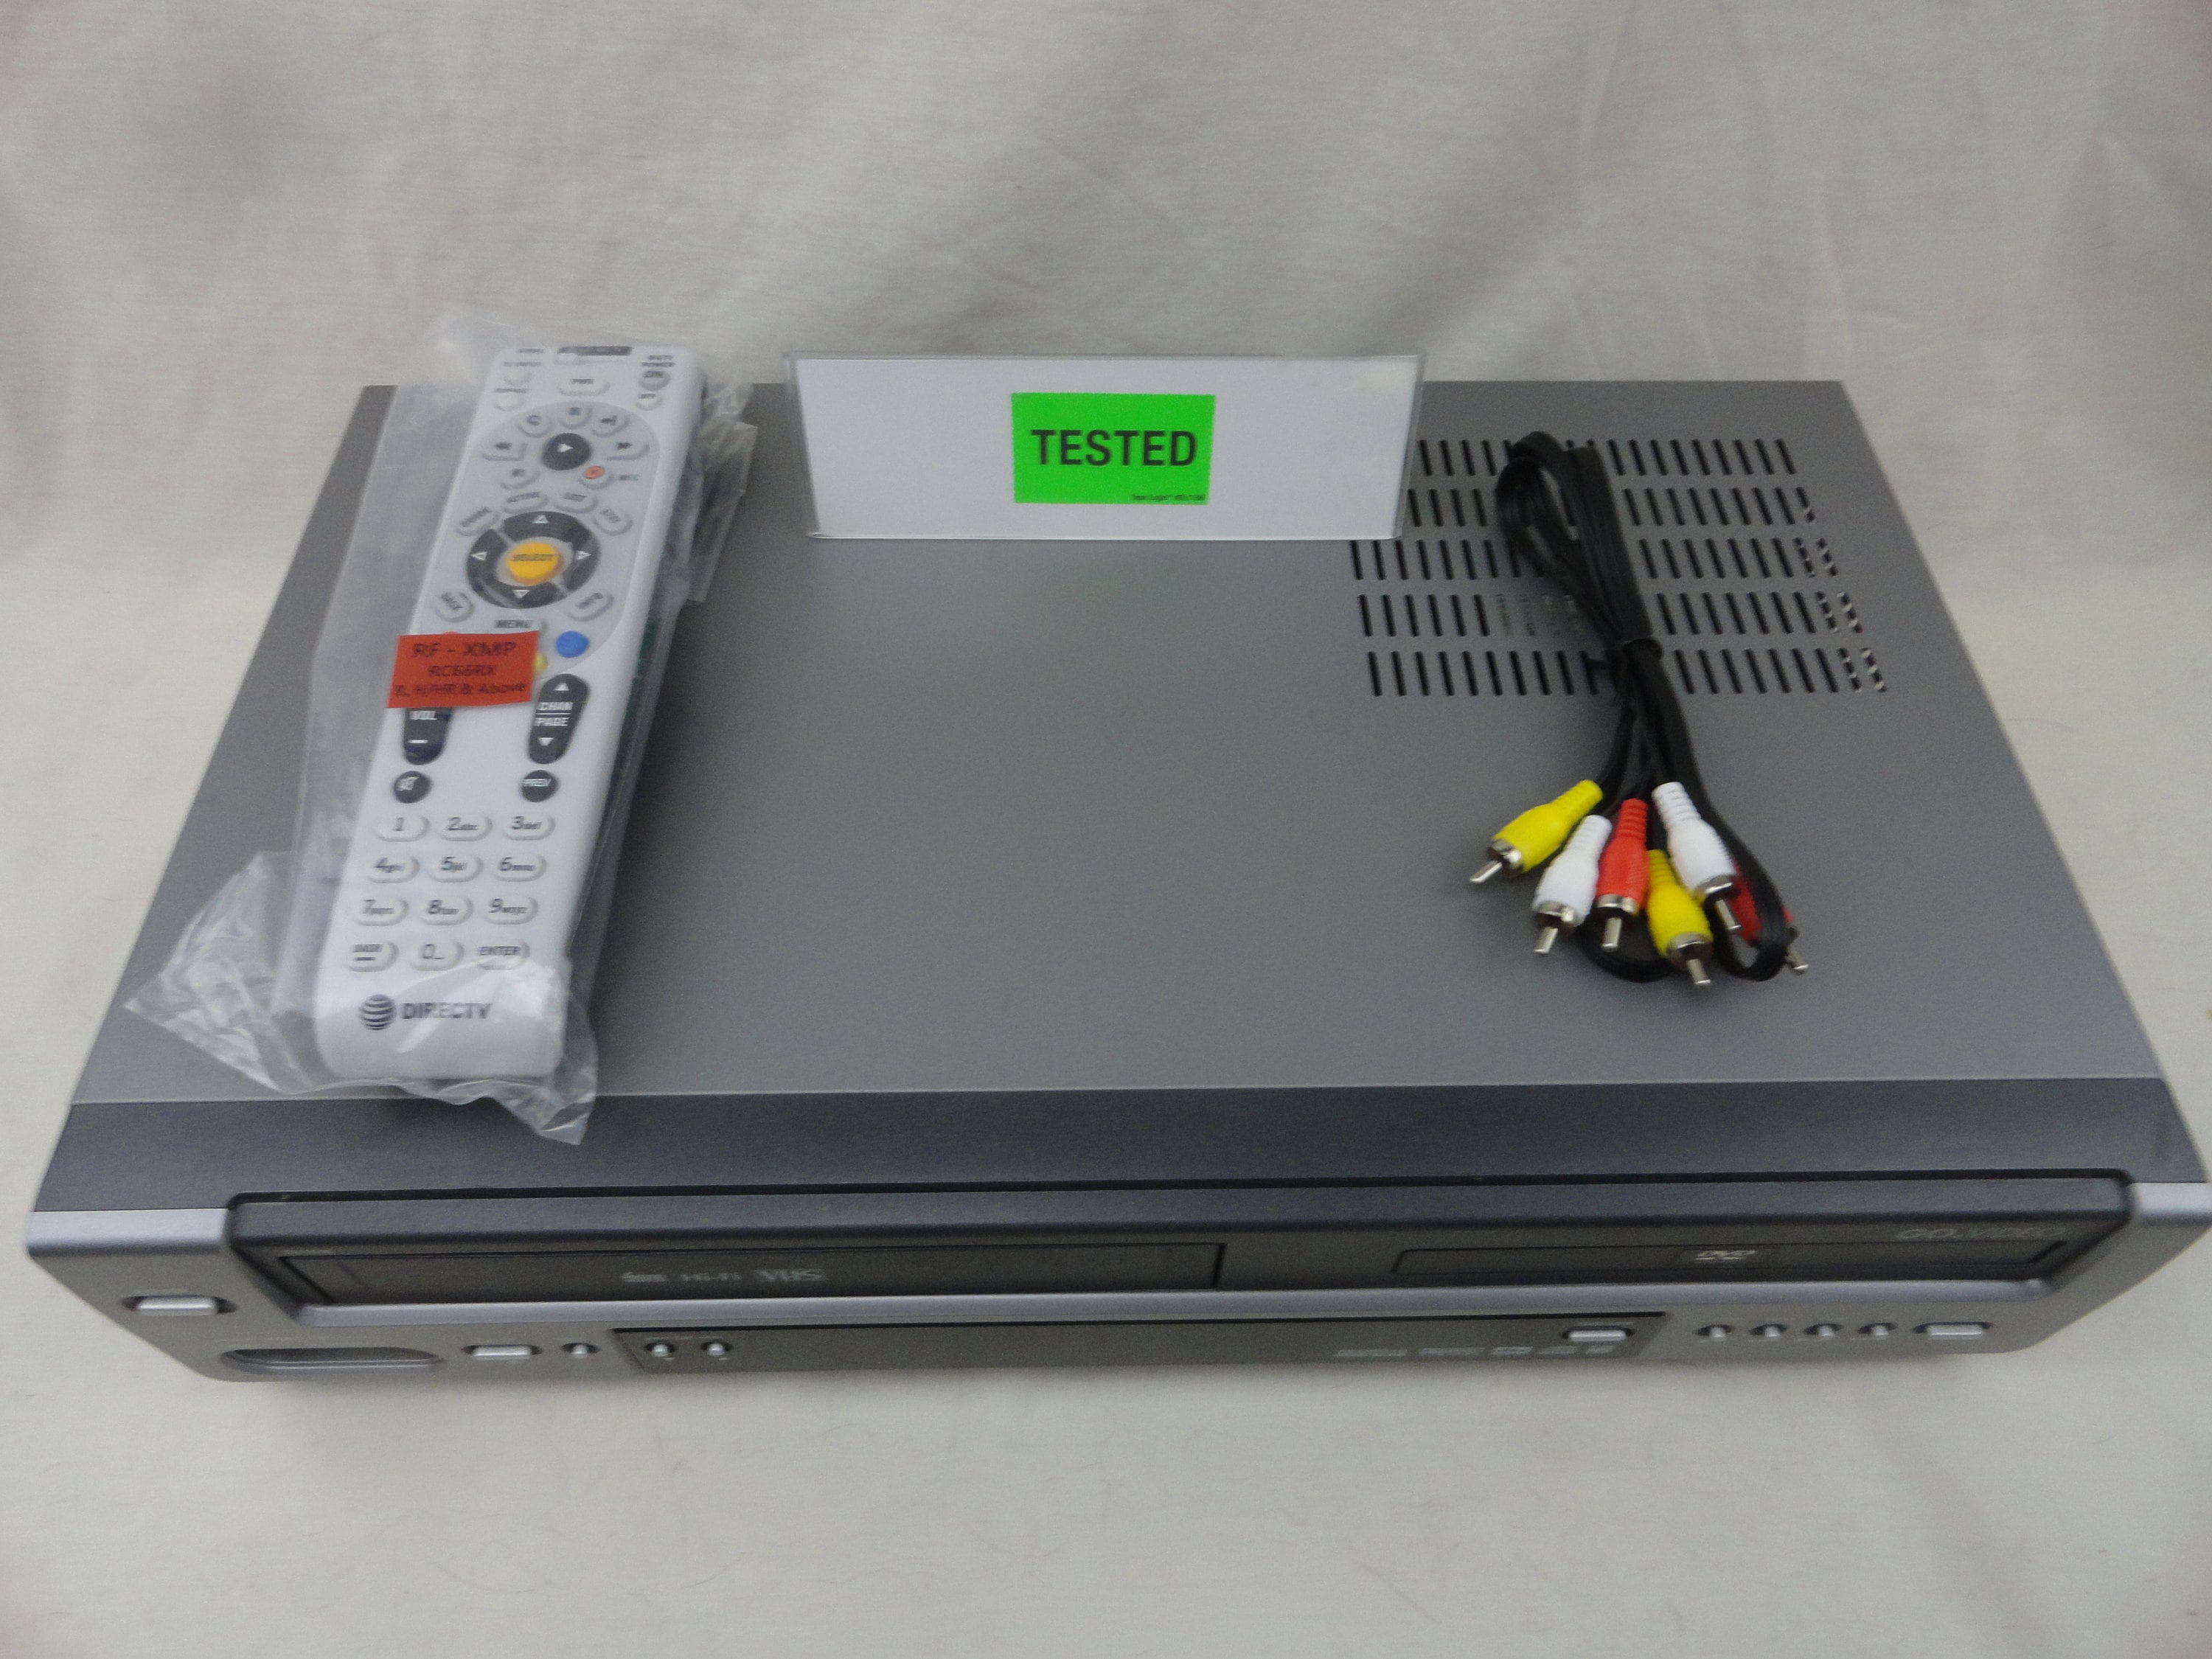 Go Video DV1030 DVD VCR Combo DVD Player Vhs Player Combo (New